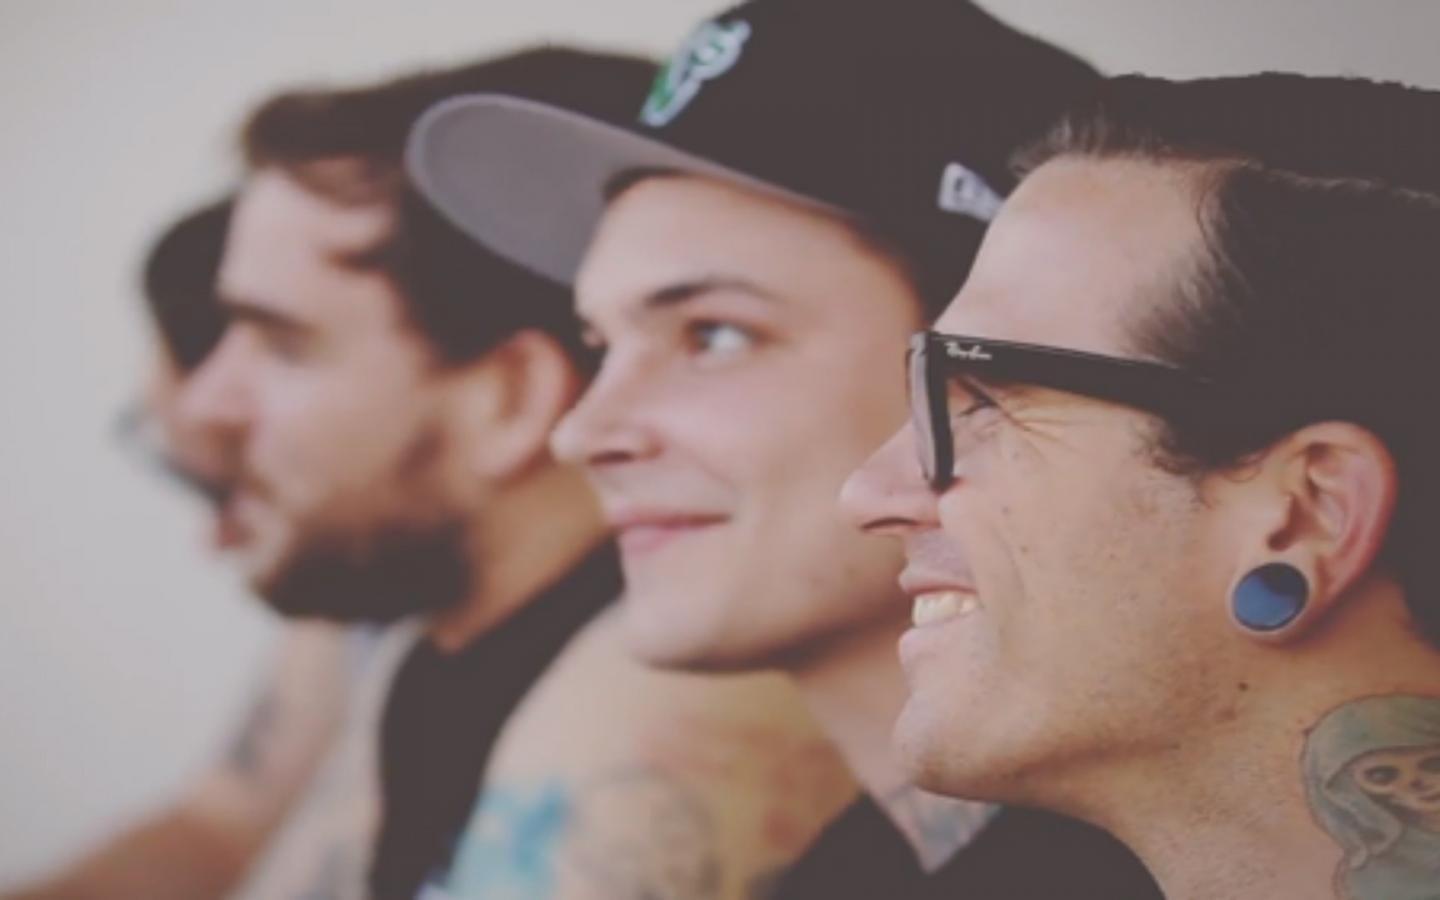 The amity affliction bands wallpaper